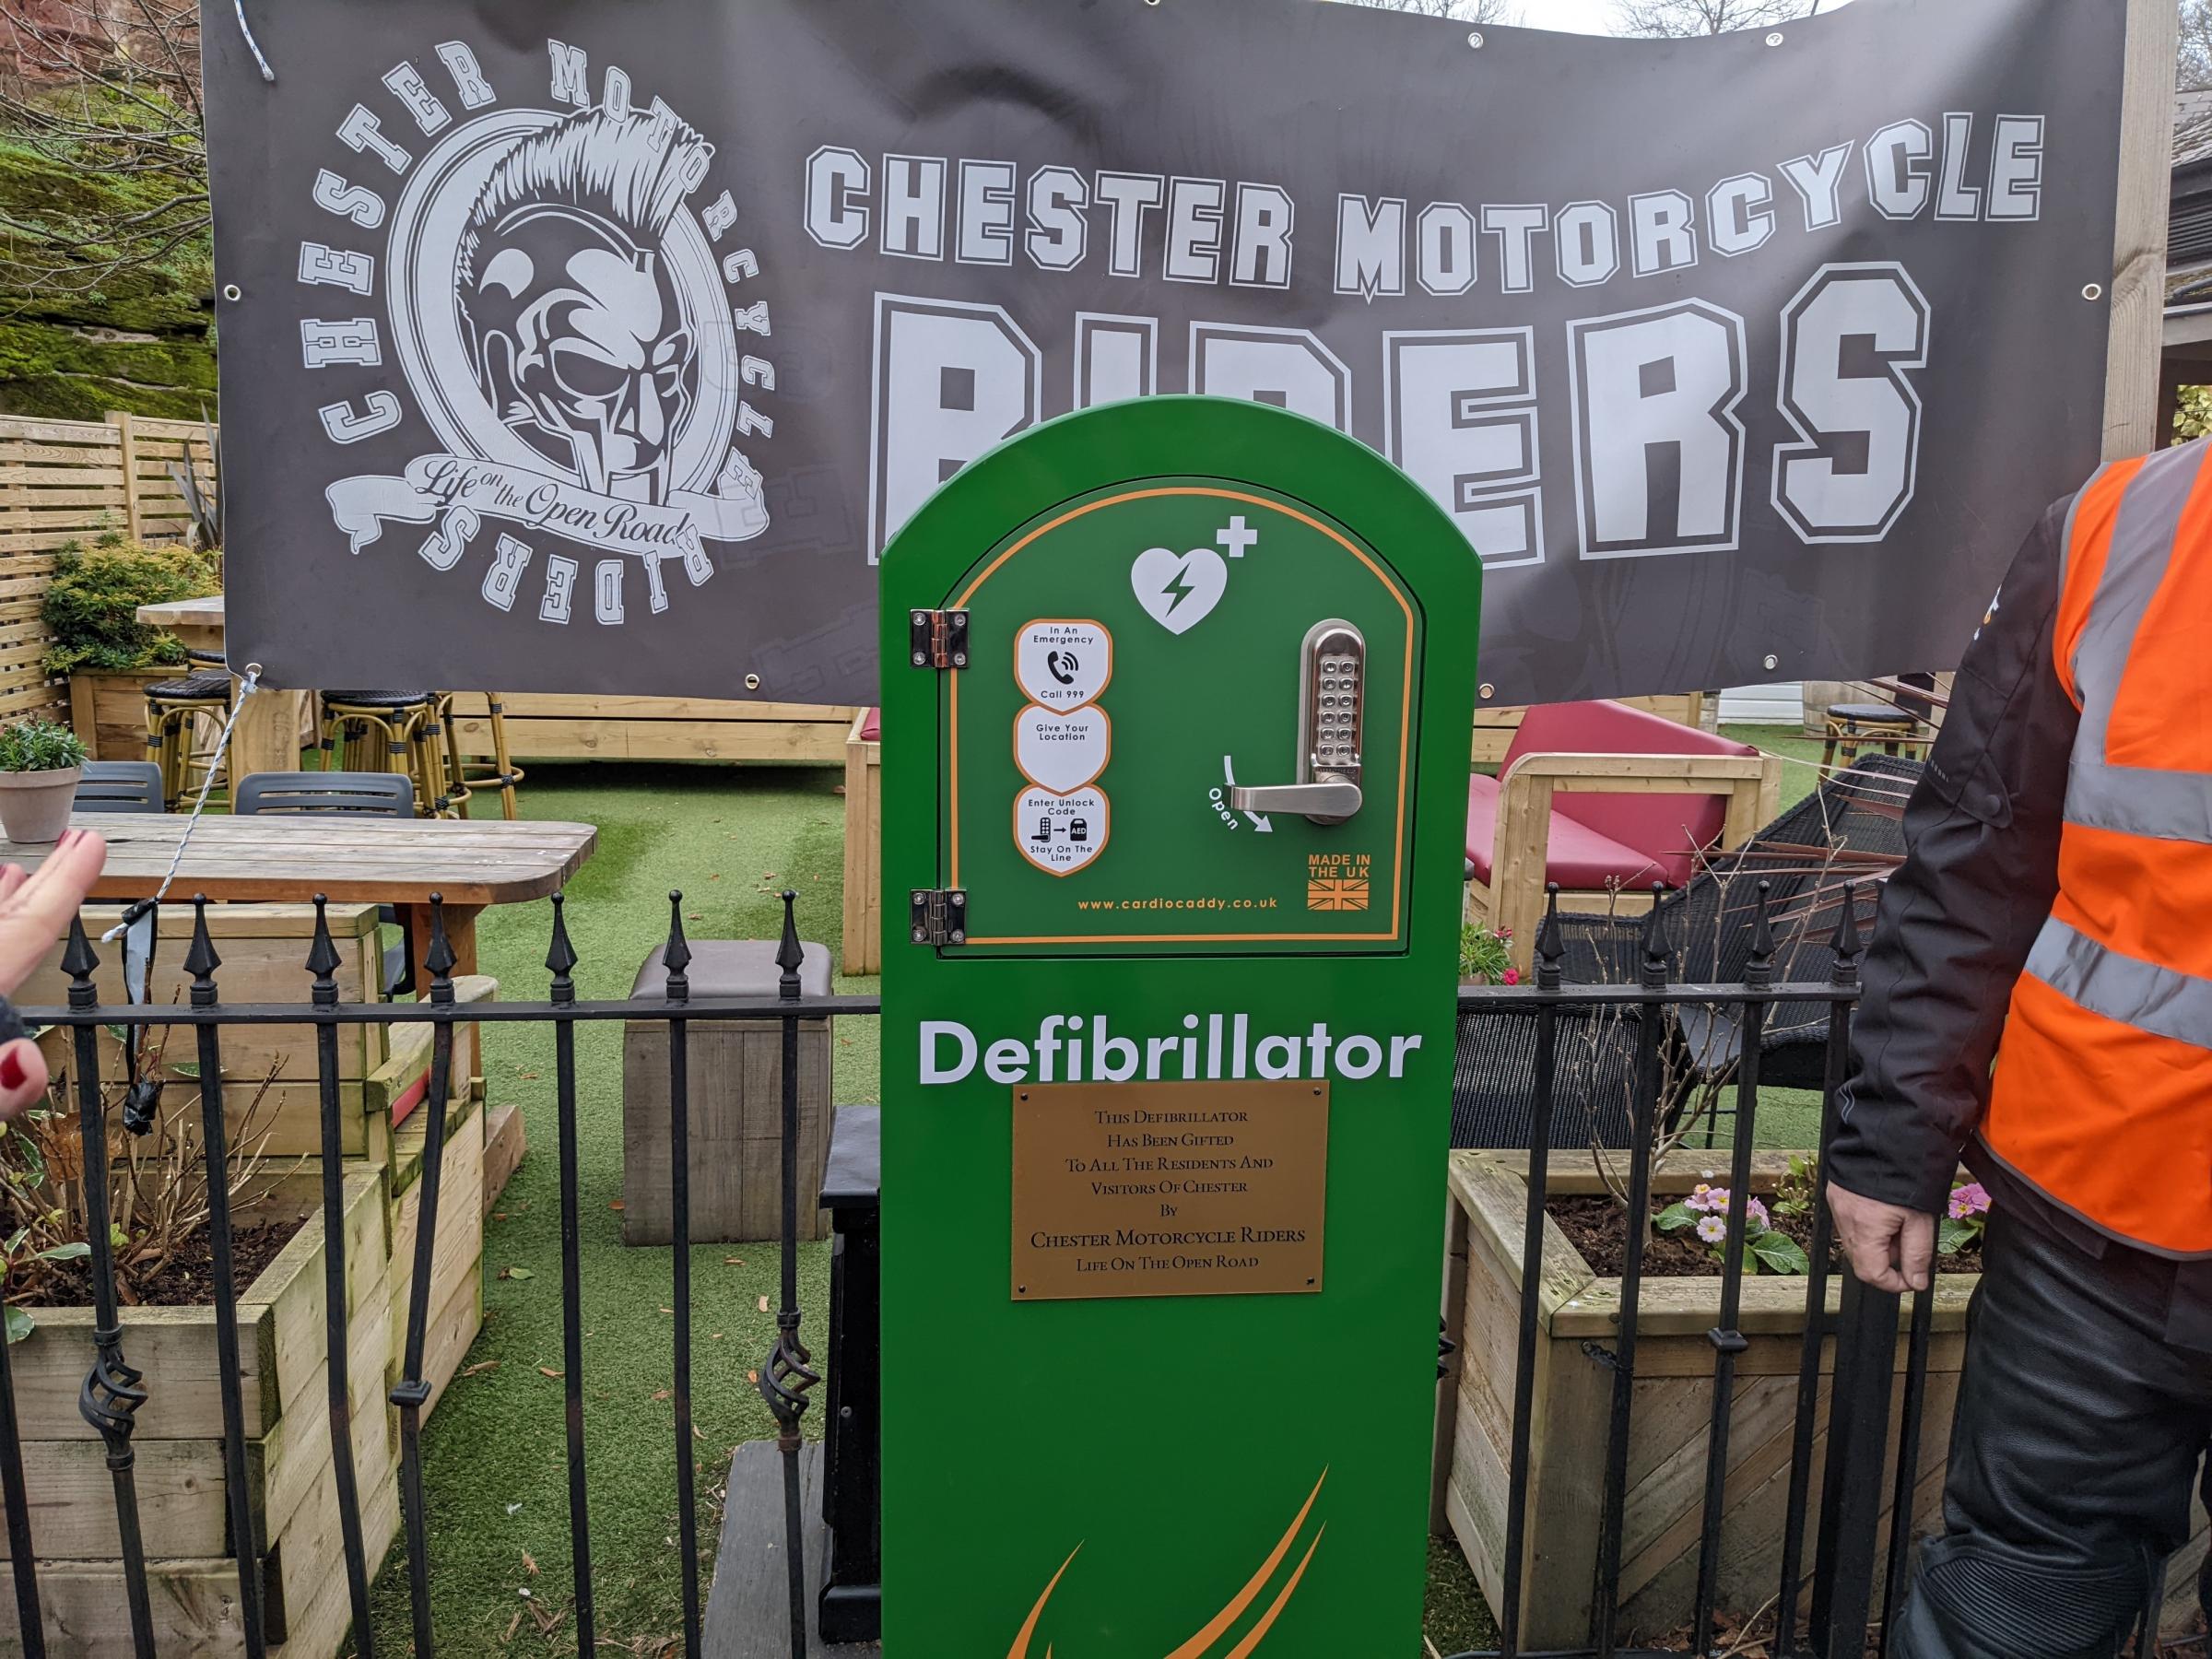 A new public defibrillator has been officially unveiled at The Groves, Chester, thanks to the fundraising efforts of the local biking community.